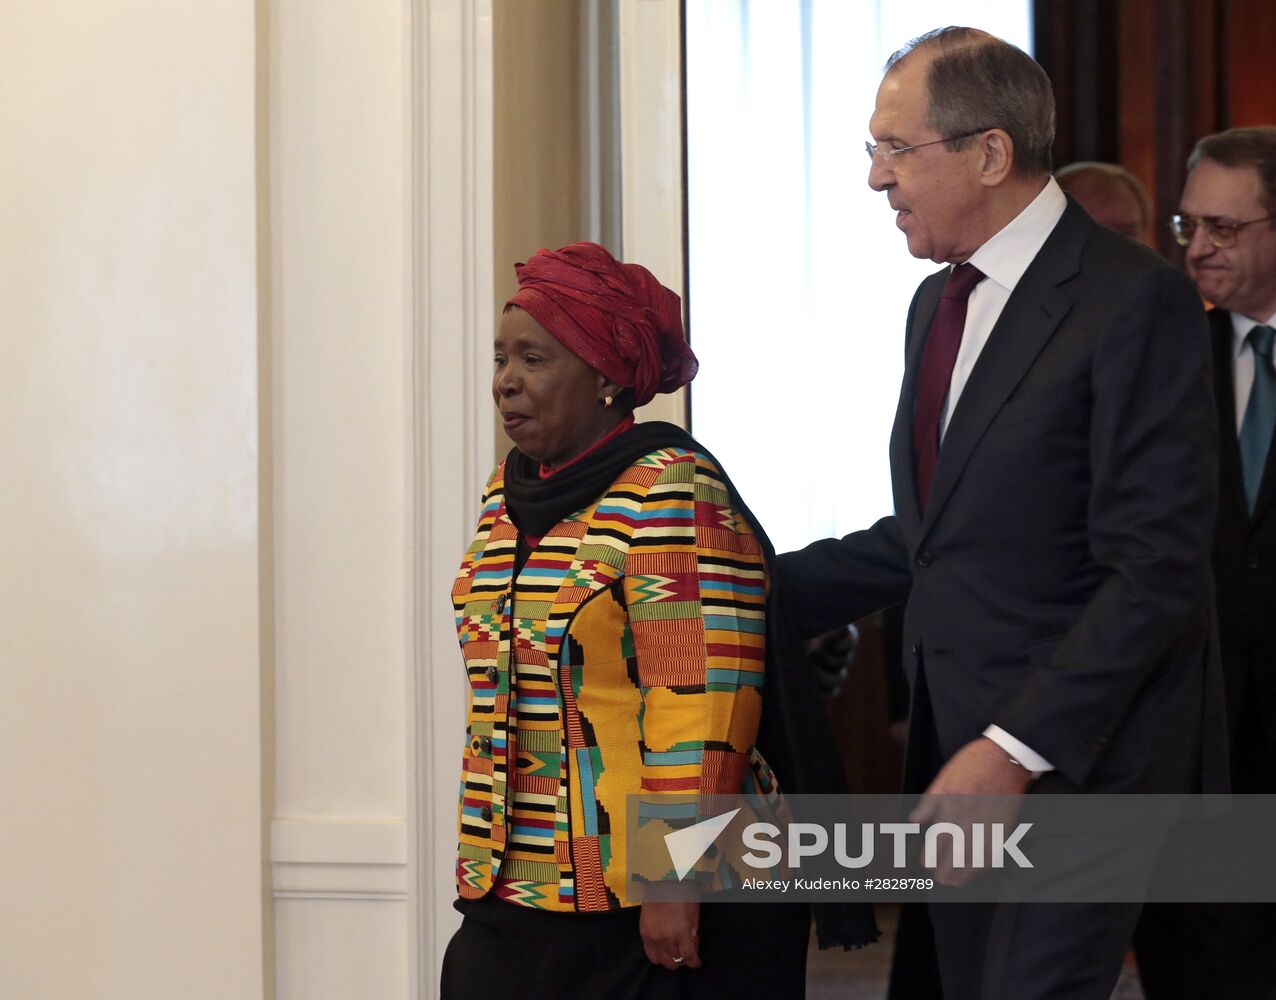 Russian Foreign Minister Sergei Lavrov's meeting with Chairperson of the African Union Commission Nkosazana Dlamini-Zuma